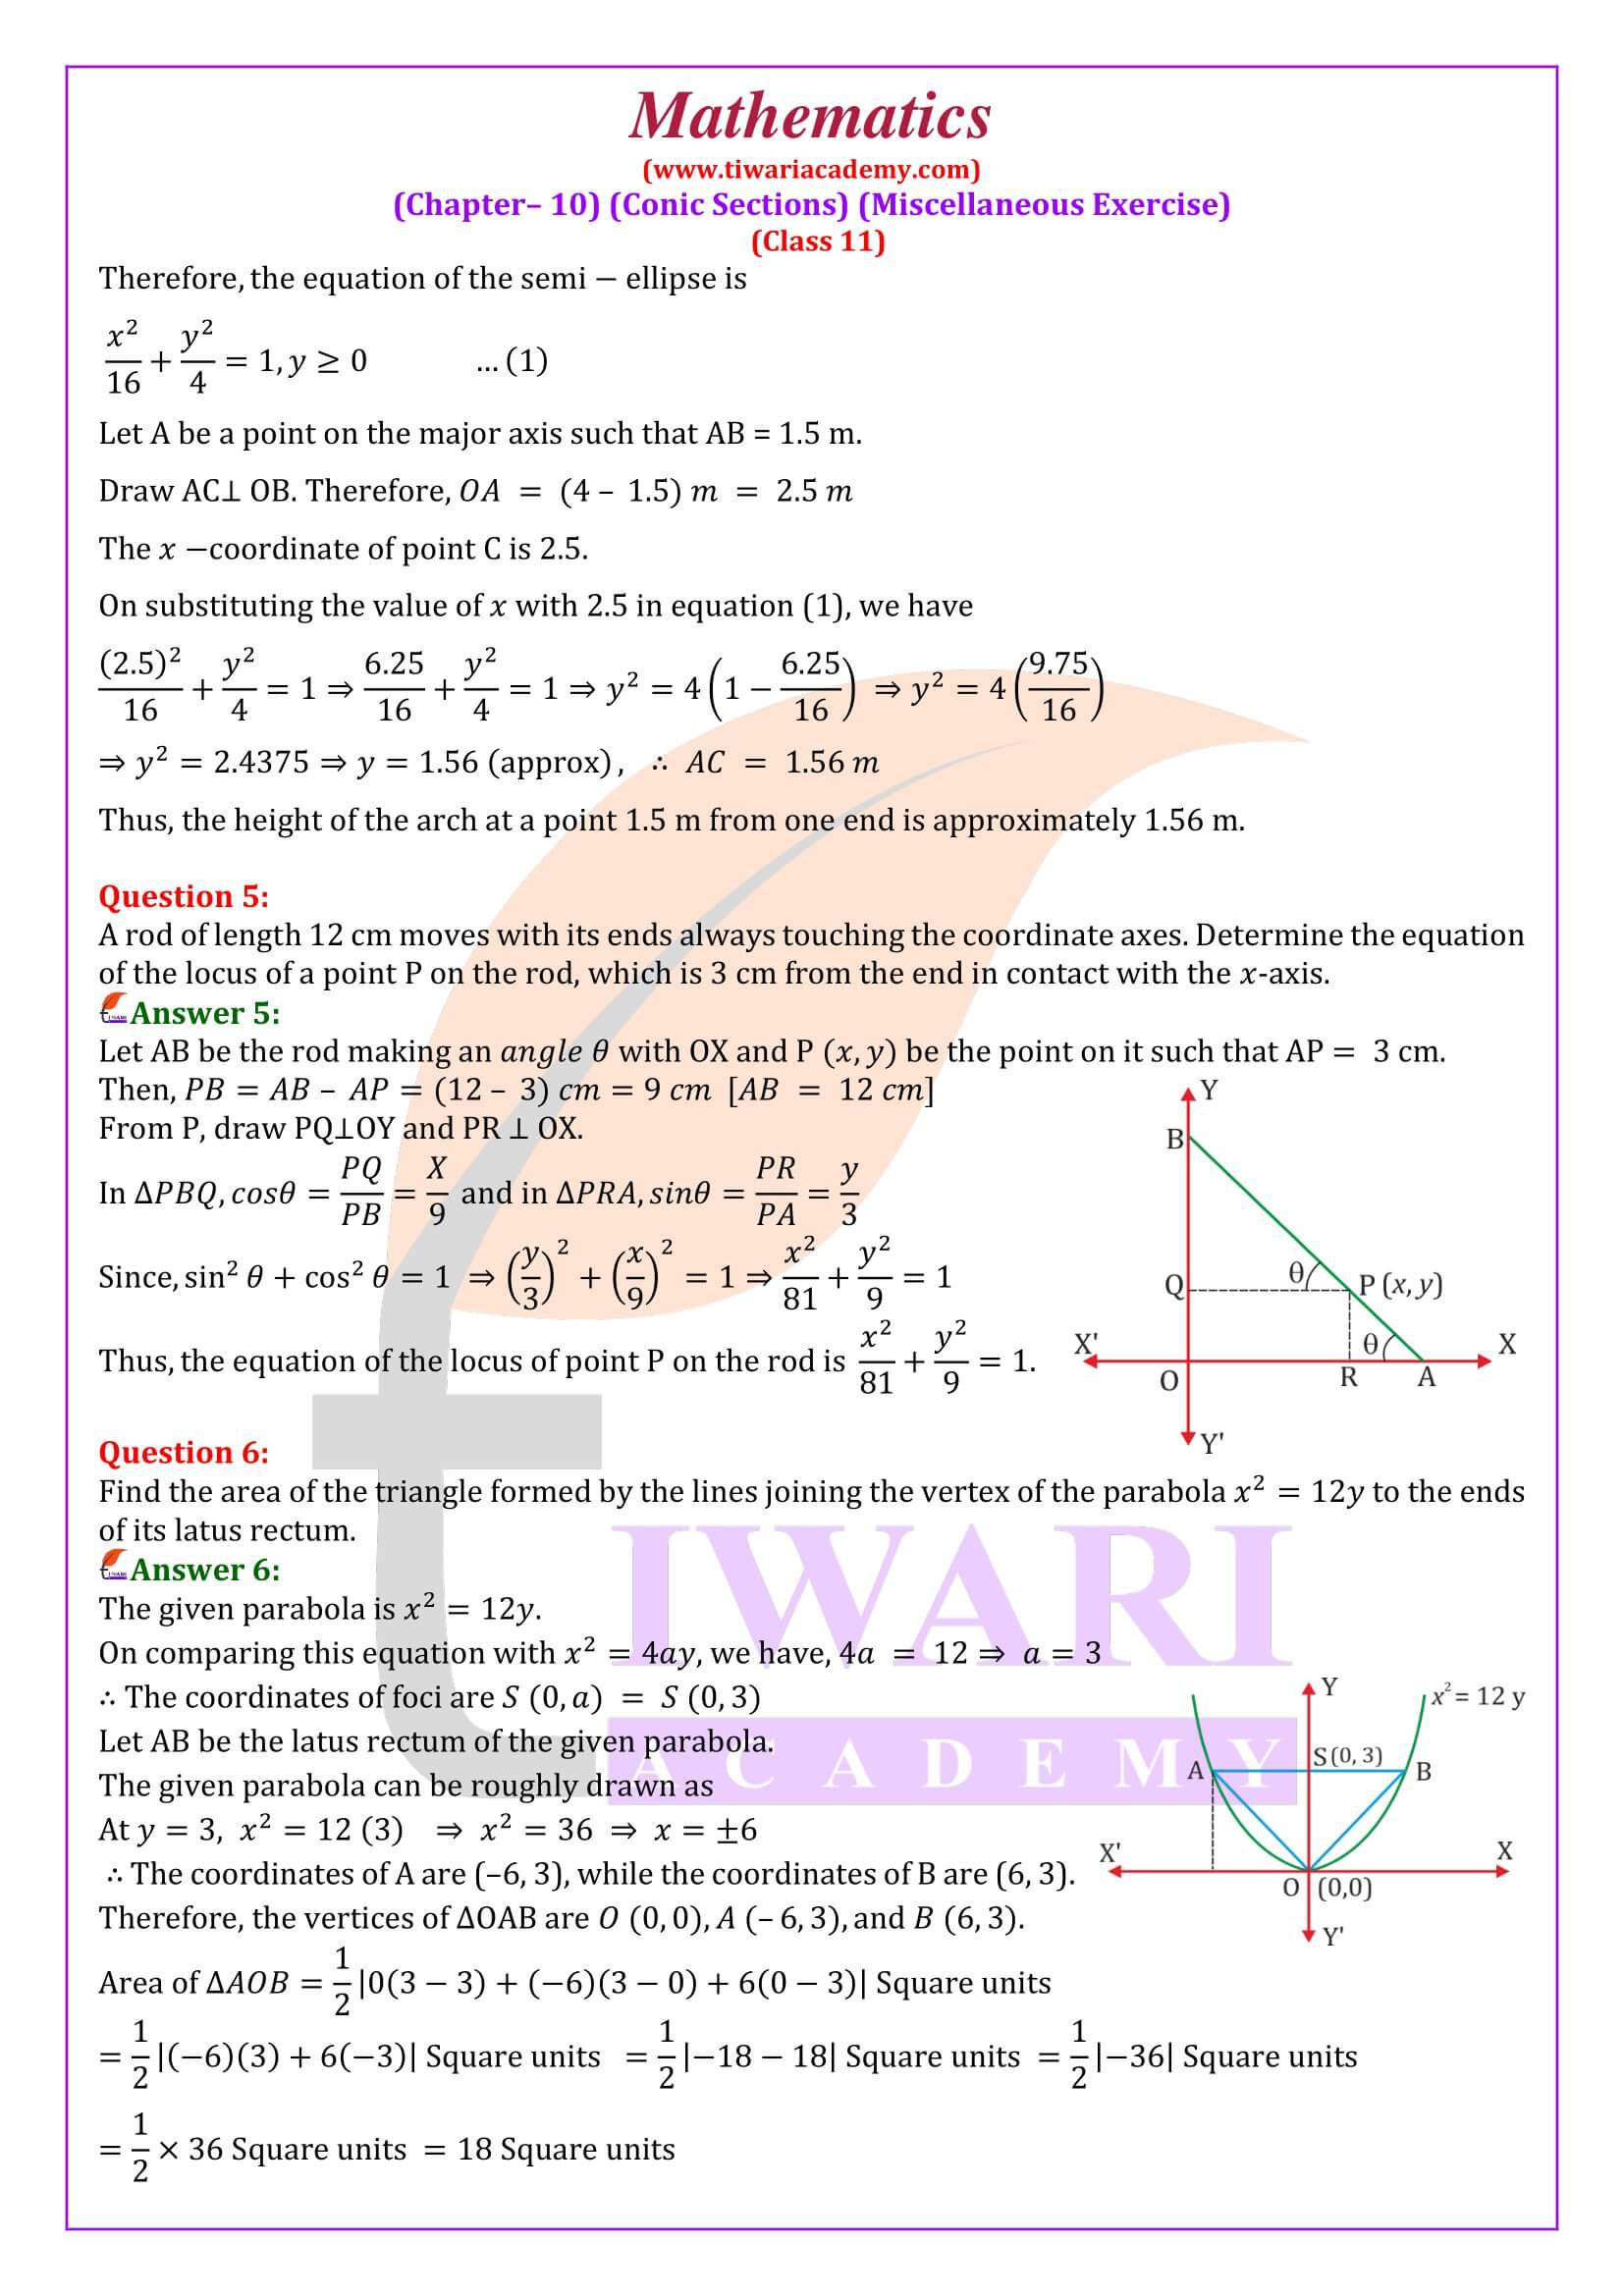 Class 11 Maths Chapter 10 Miscellaneous Exercise